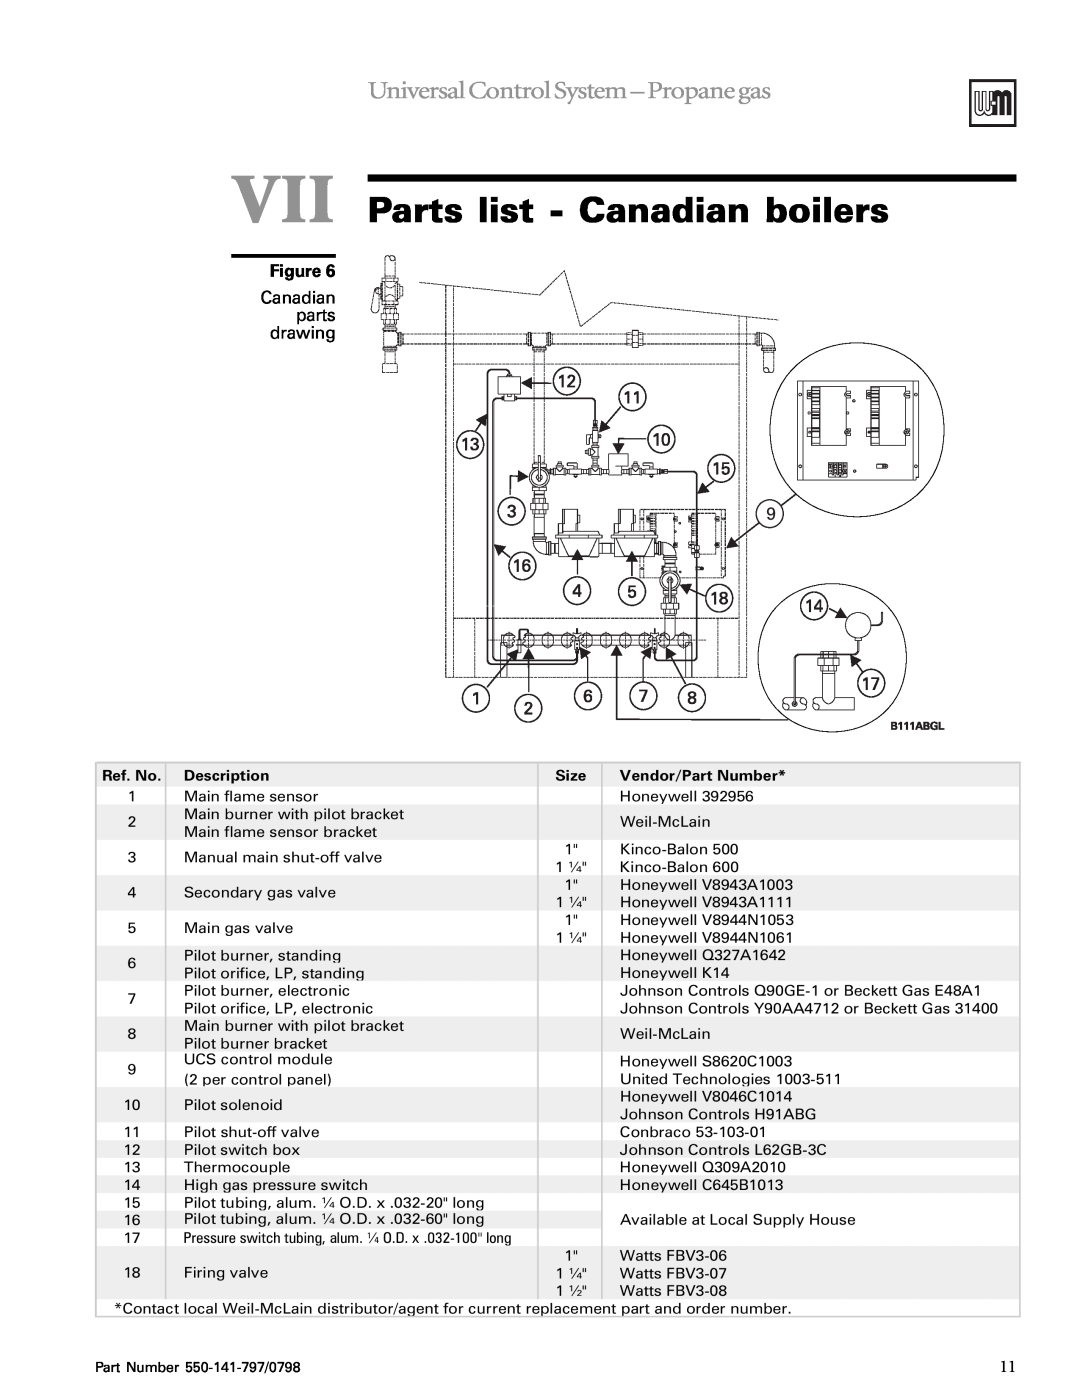 Weil-McLain LGB-11 VII Parts list - Canadian boilers, Canadian parts drawing, Universal Control System - Propane gas, xD g 